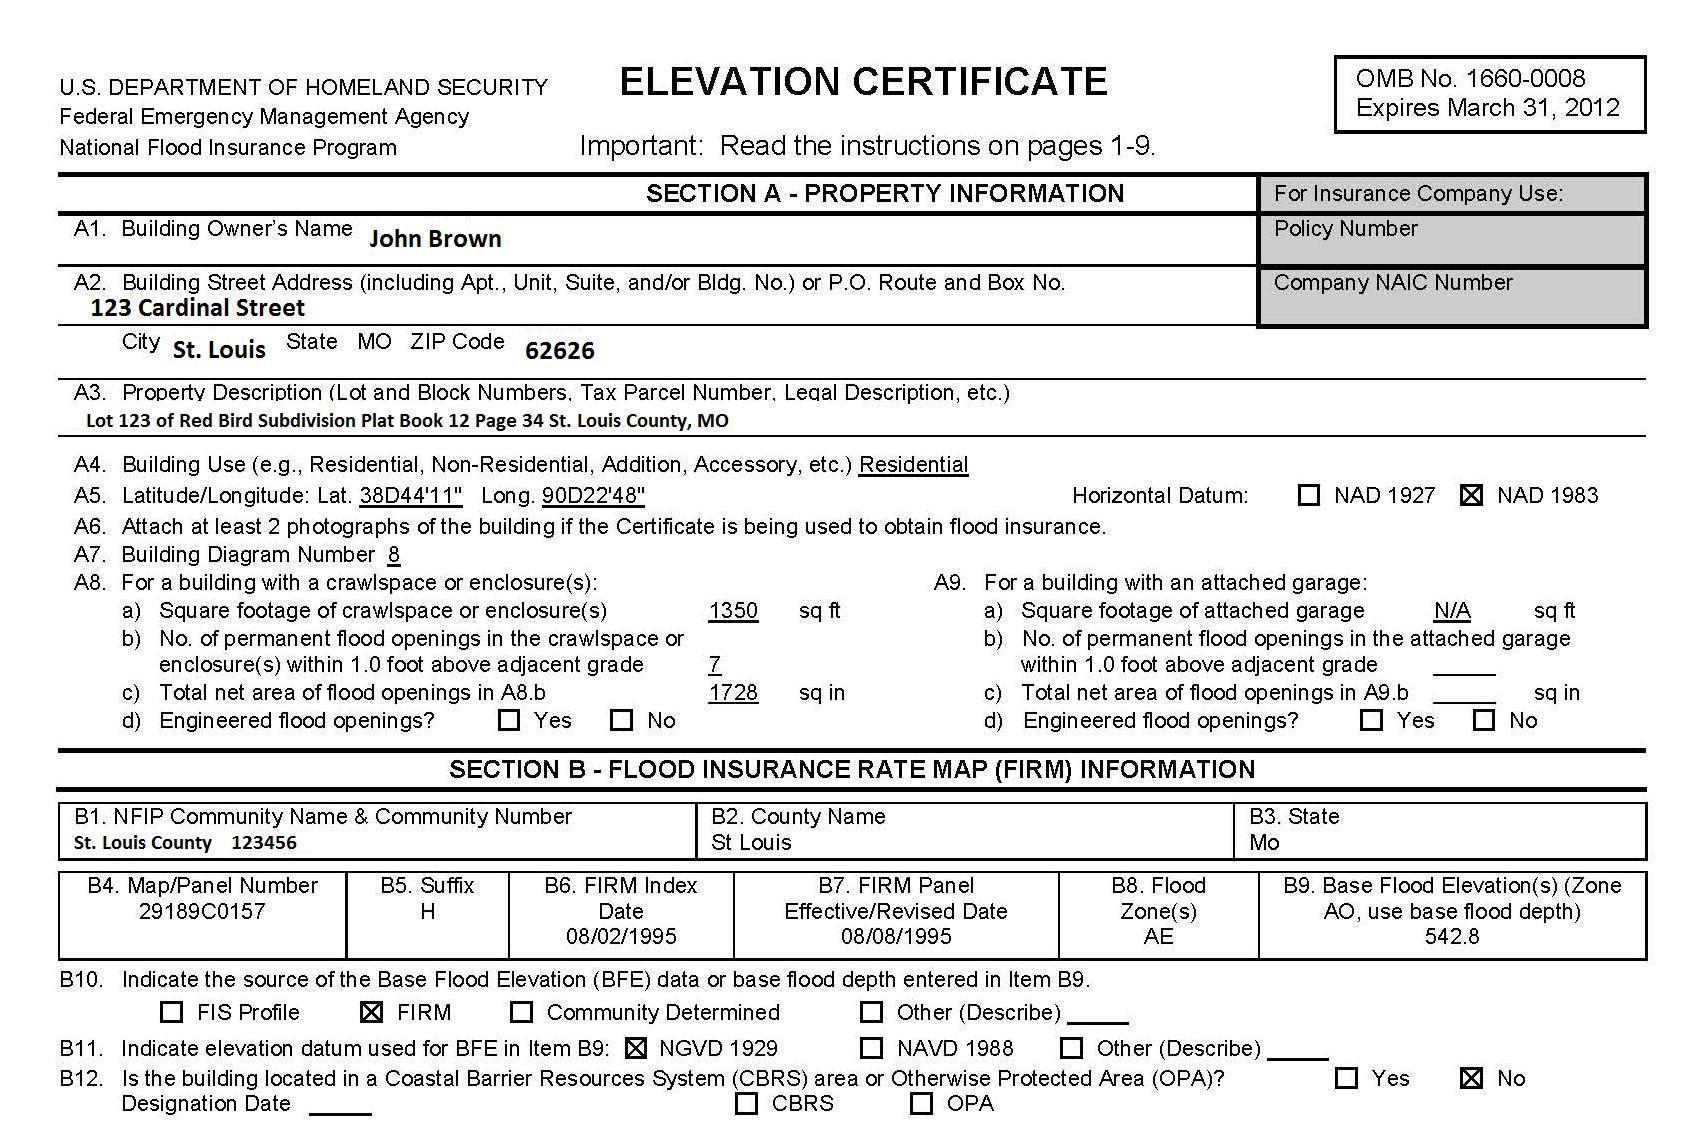 How to Read an Elevation Certificate